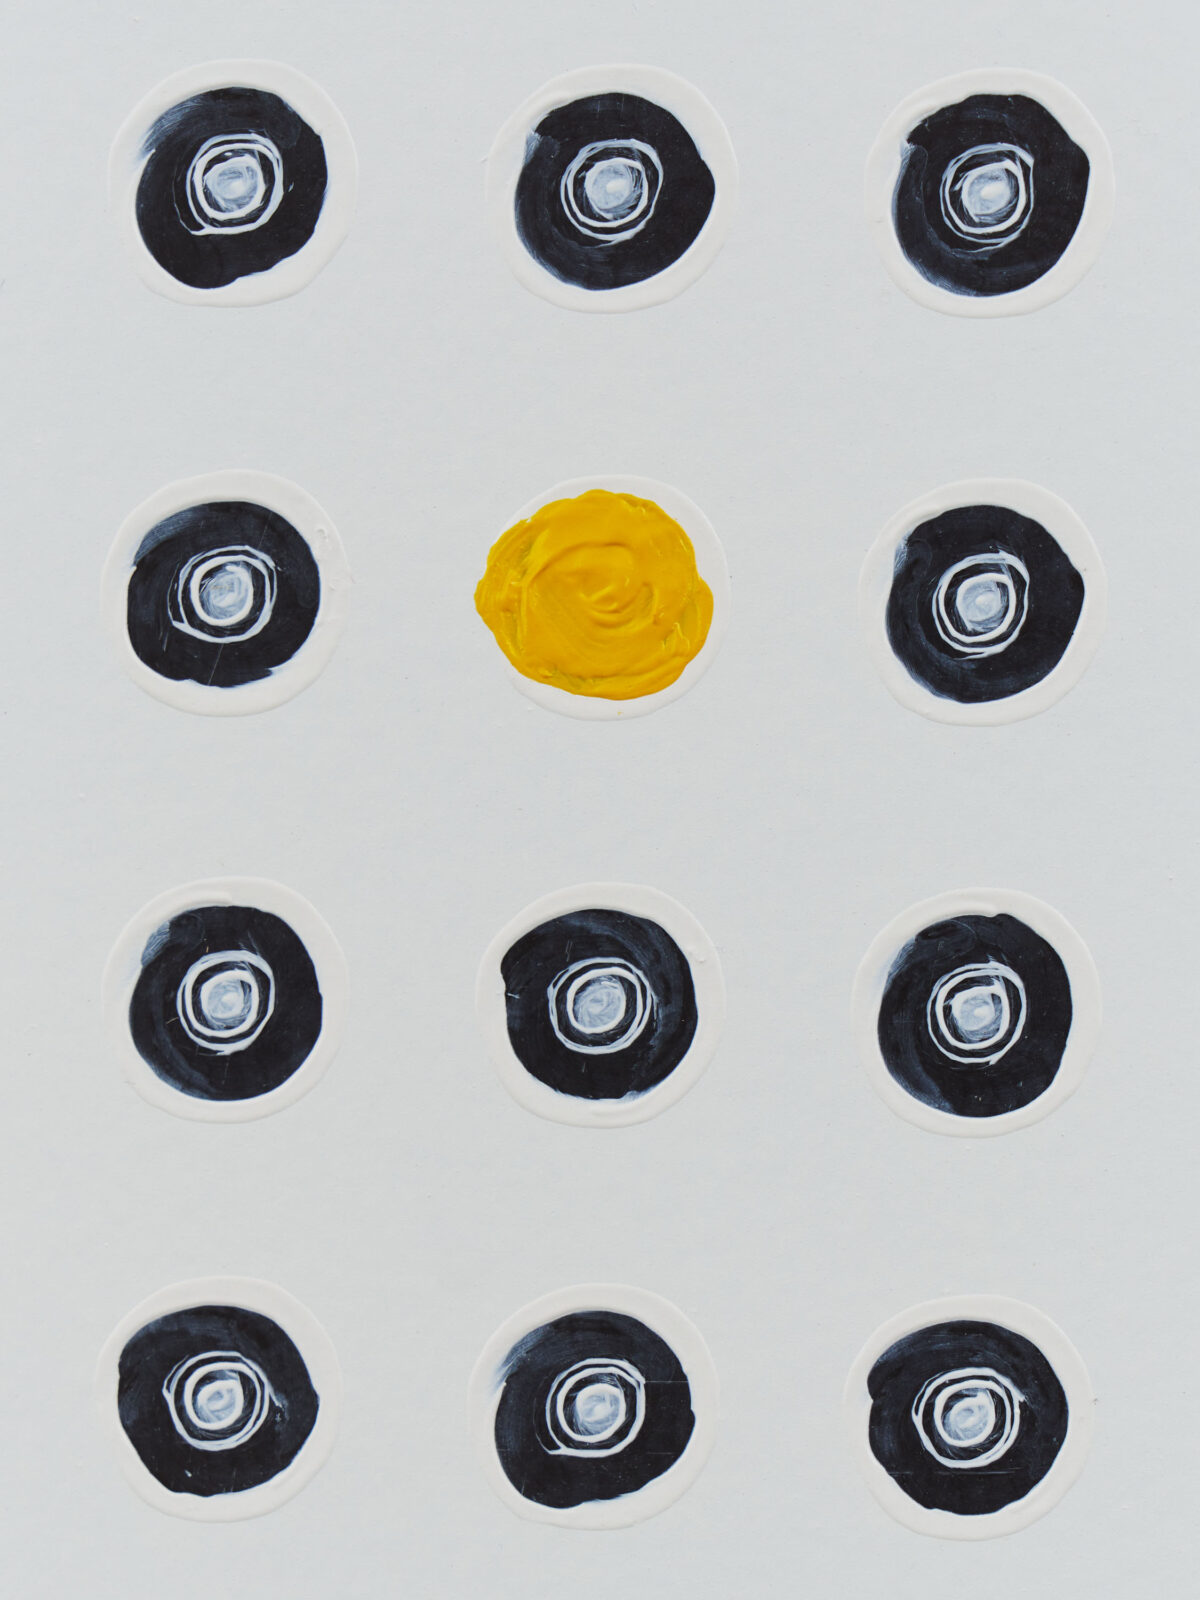 black repeating circles with one yellow circle